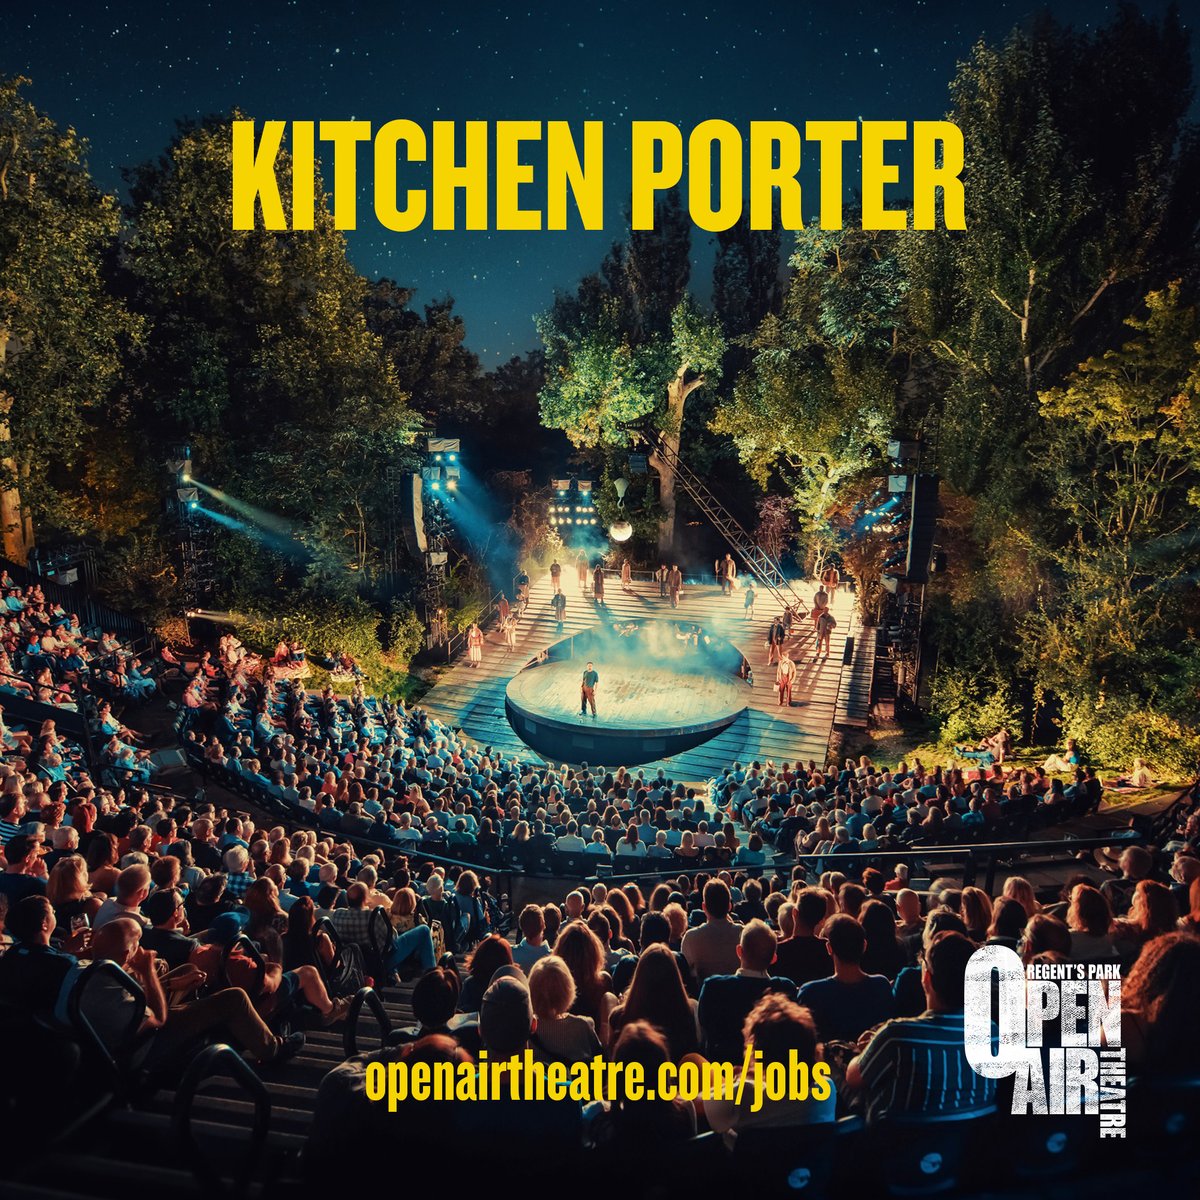 Fancy working with us for the summer? 🌞 We are looking for a friendly and hard-working Kitchen Porter to join the team! Read more and apply on our website – openairtheatre.com/jobs